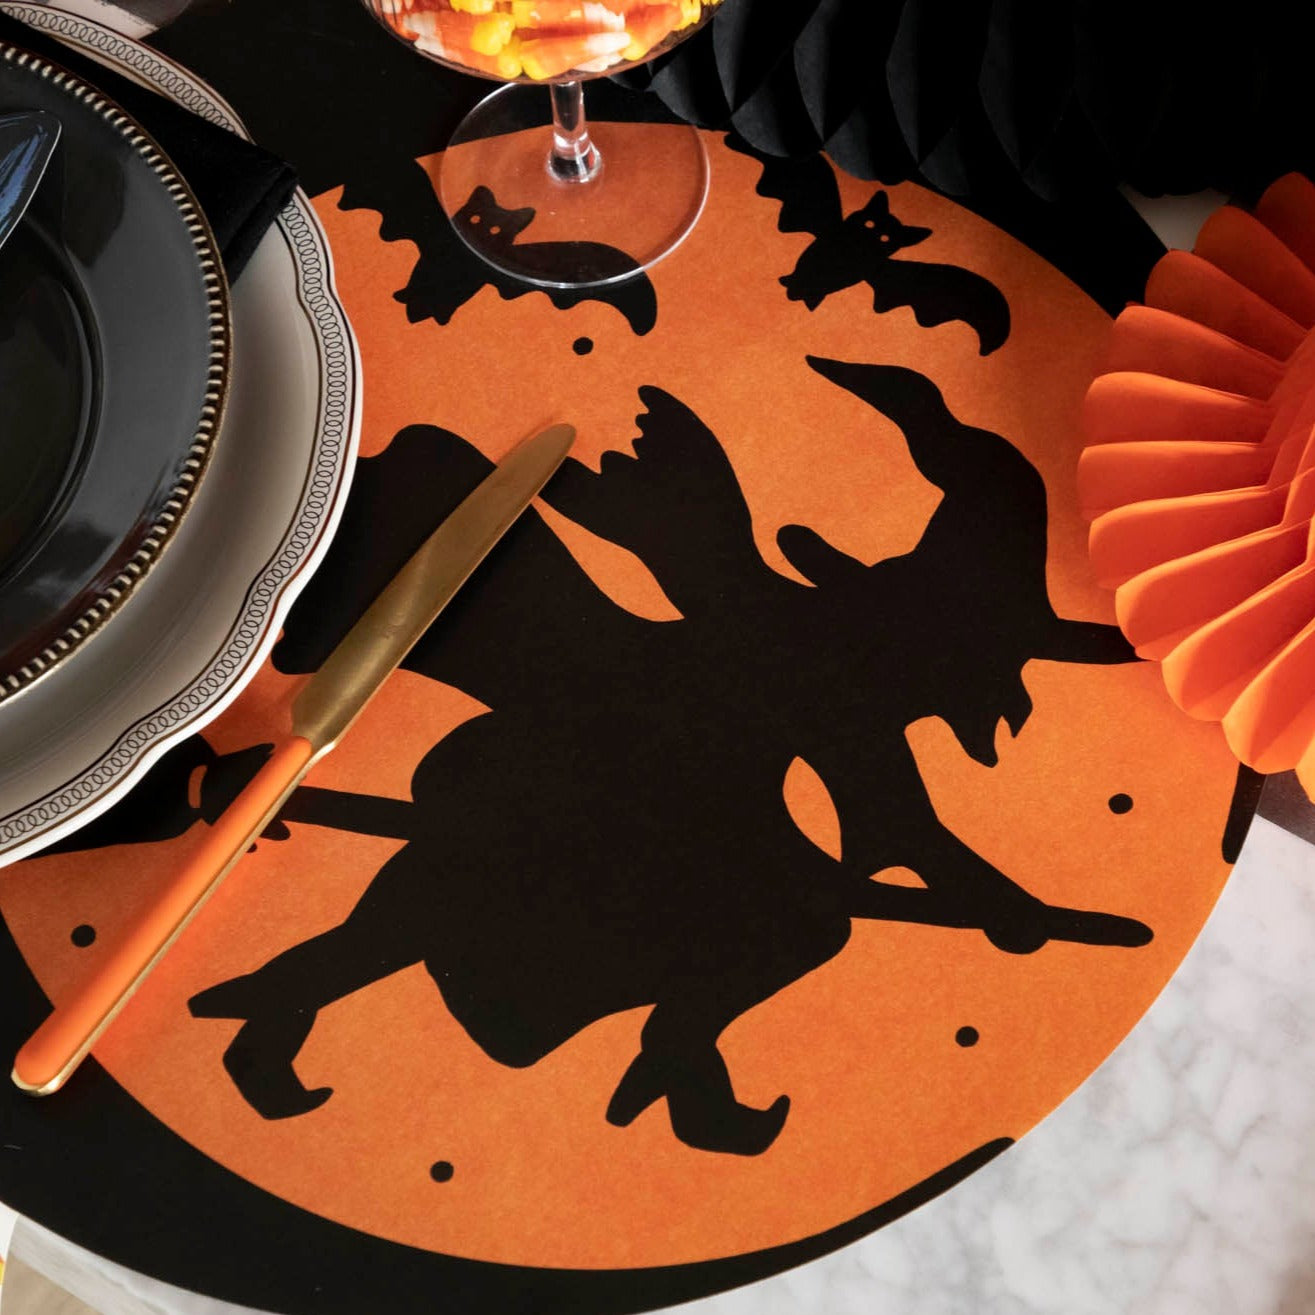 Die-cut Wicked Witch Placemat